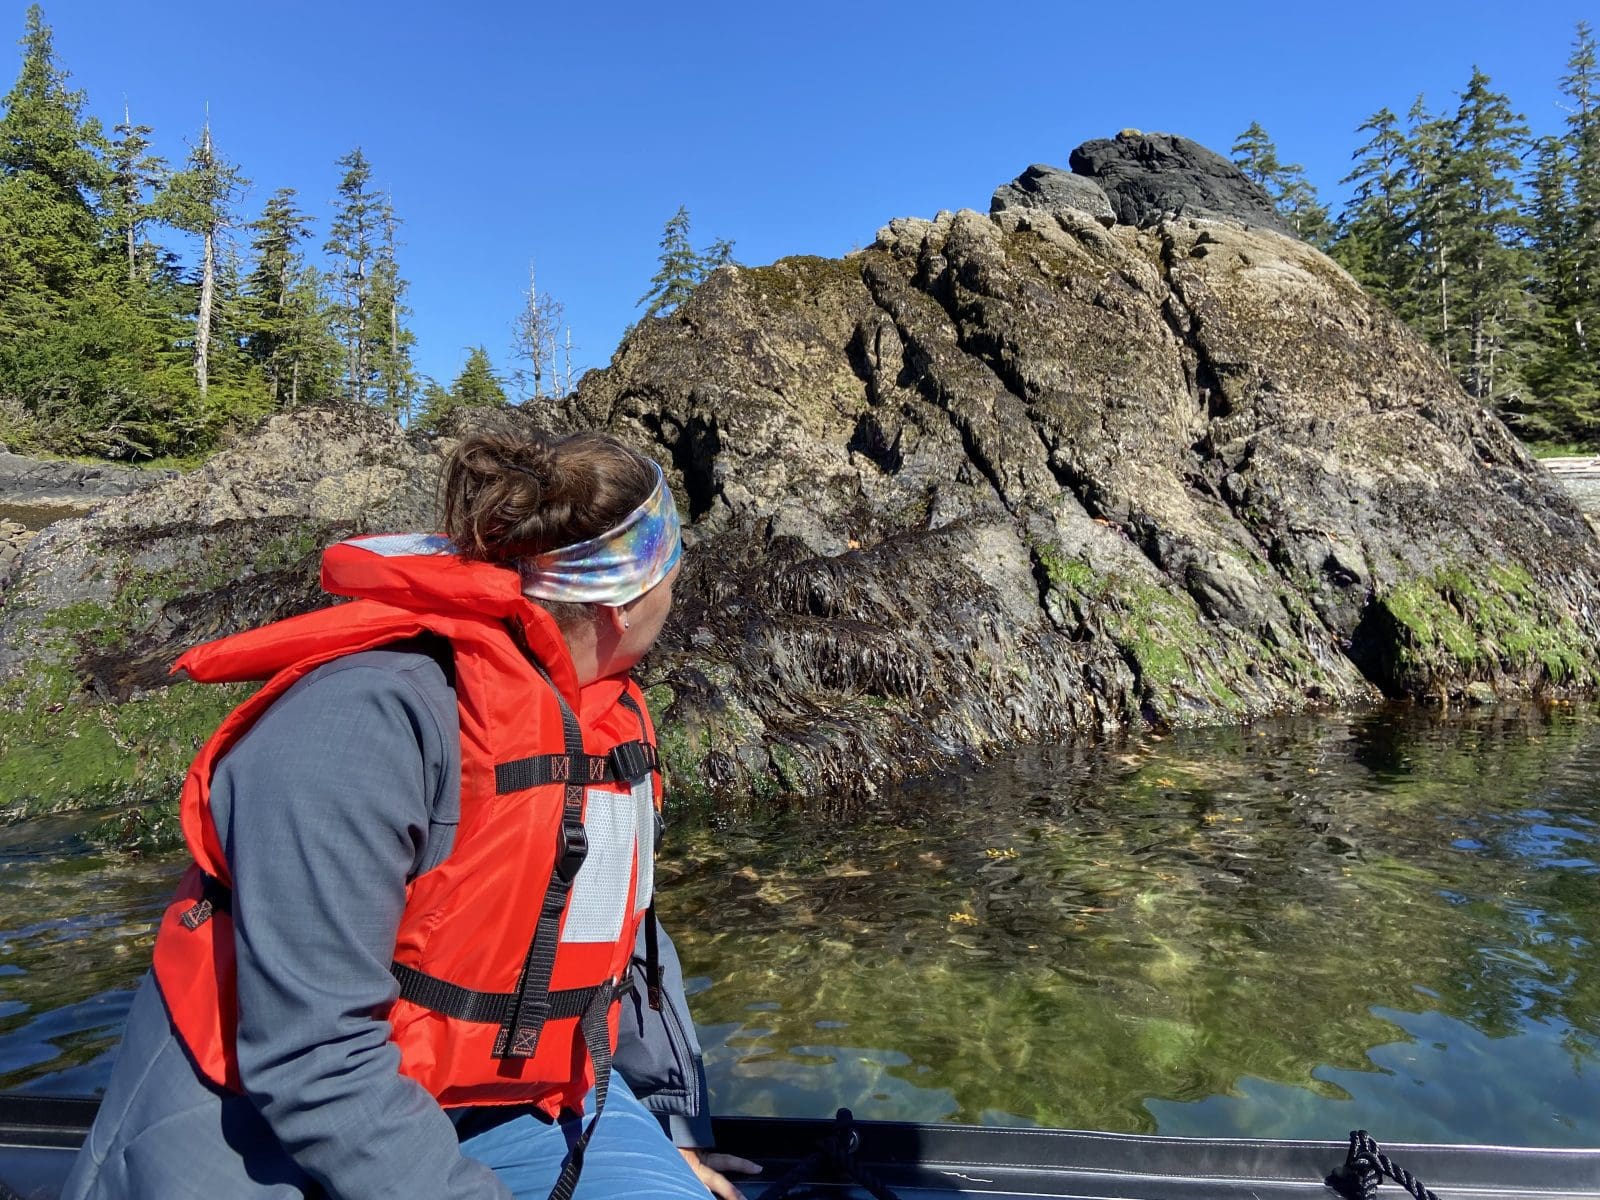 Viewing the intertidal zone from a Zodiac